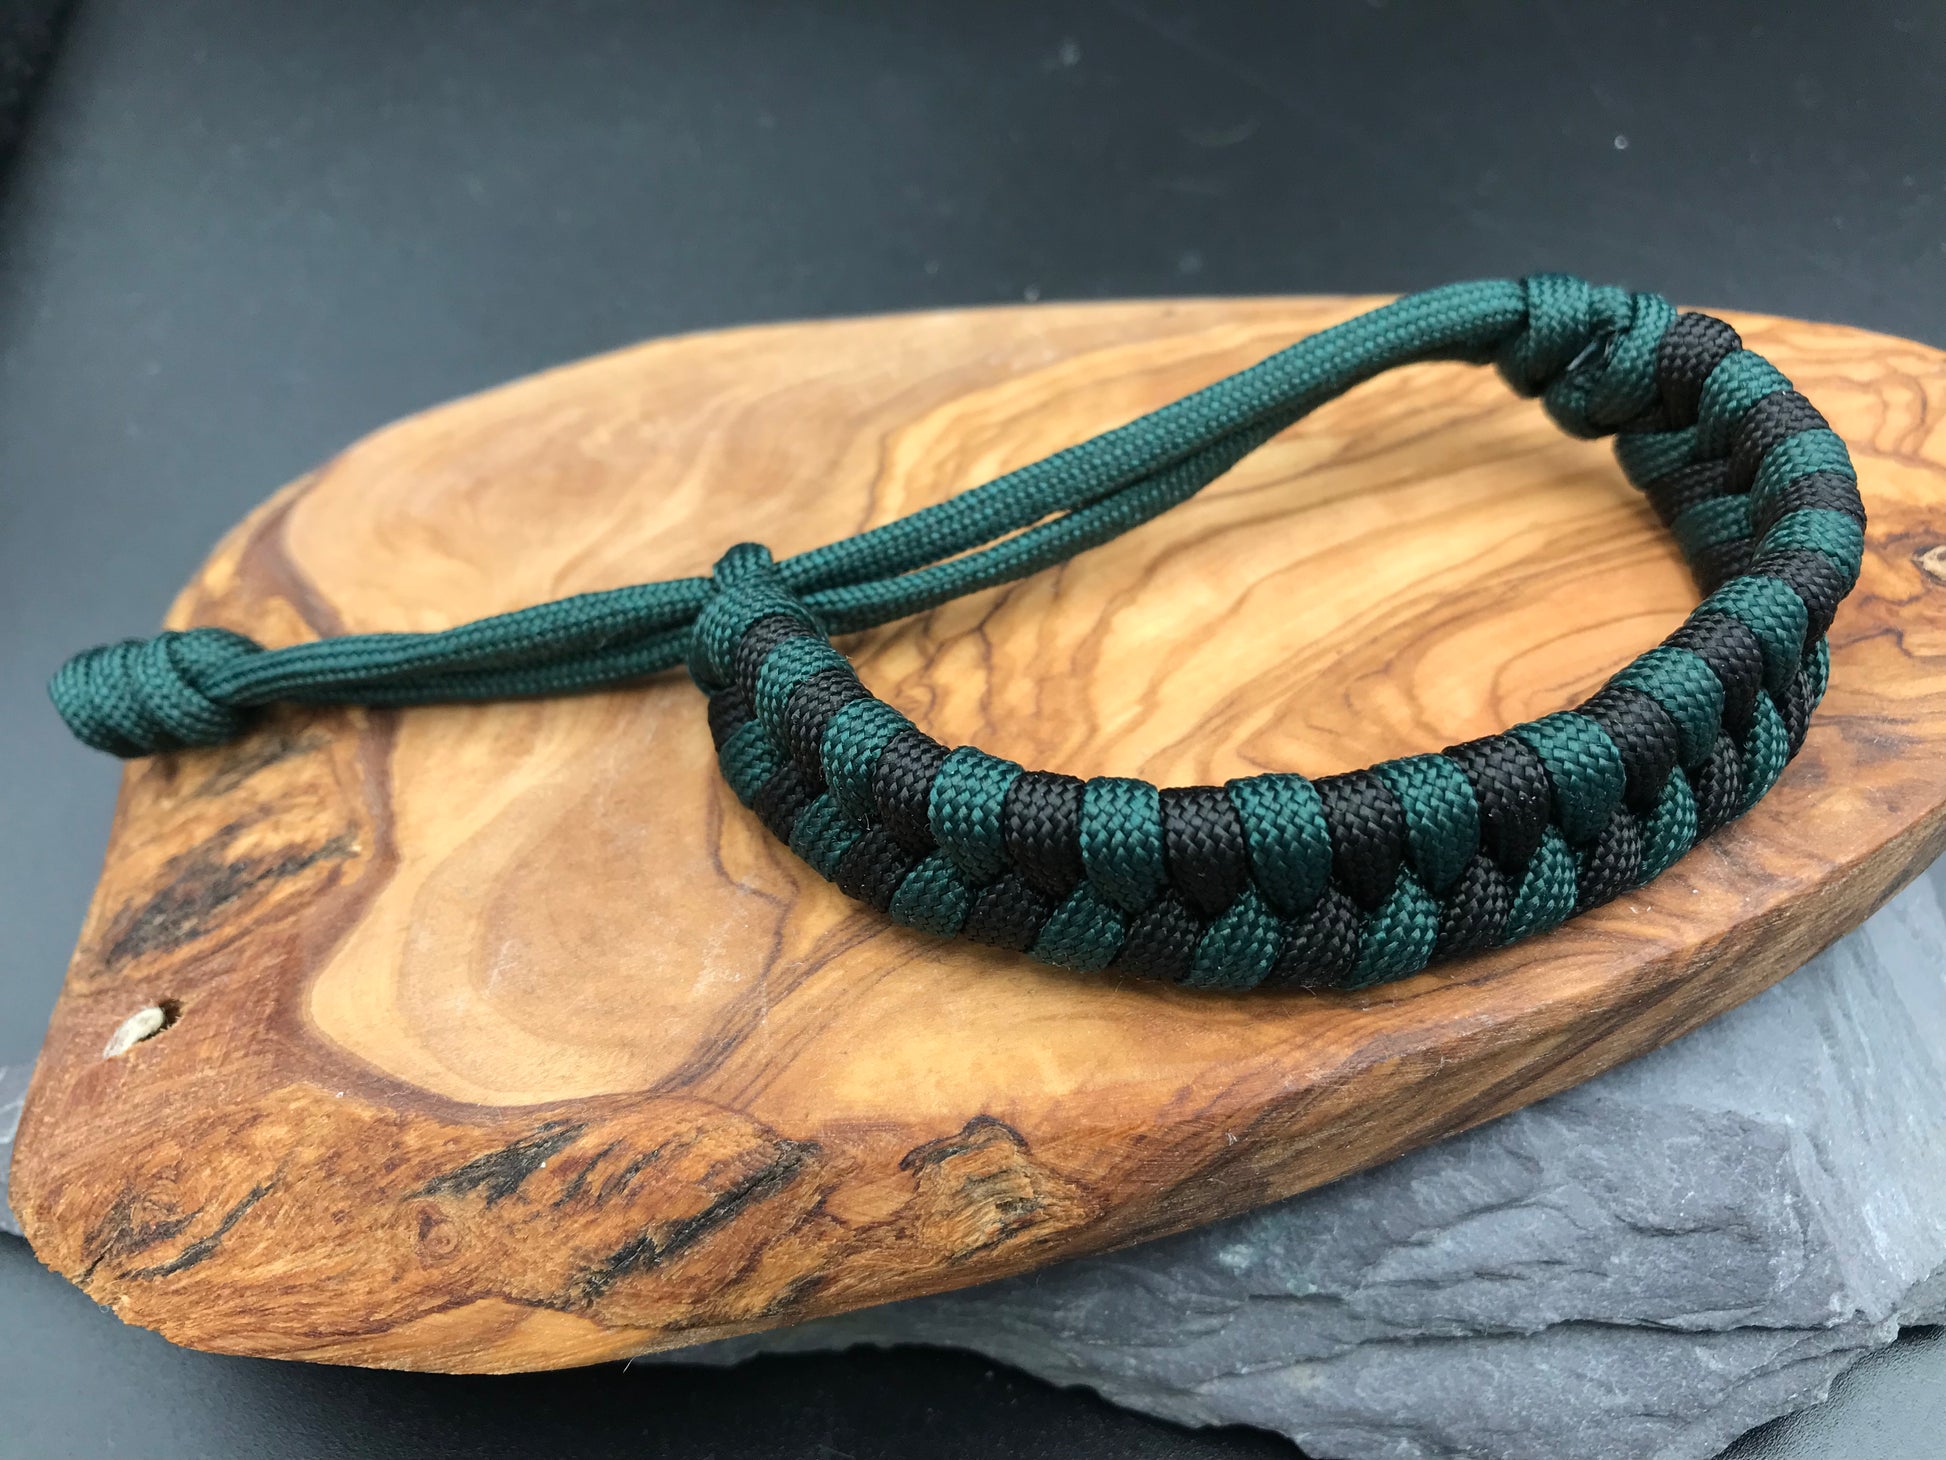 Handmade Paracord Fishtail weave bracelet in Black and emerald green colour